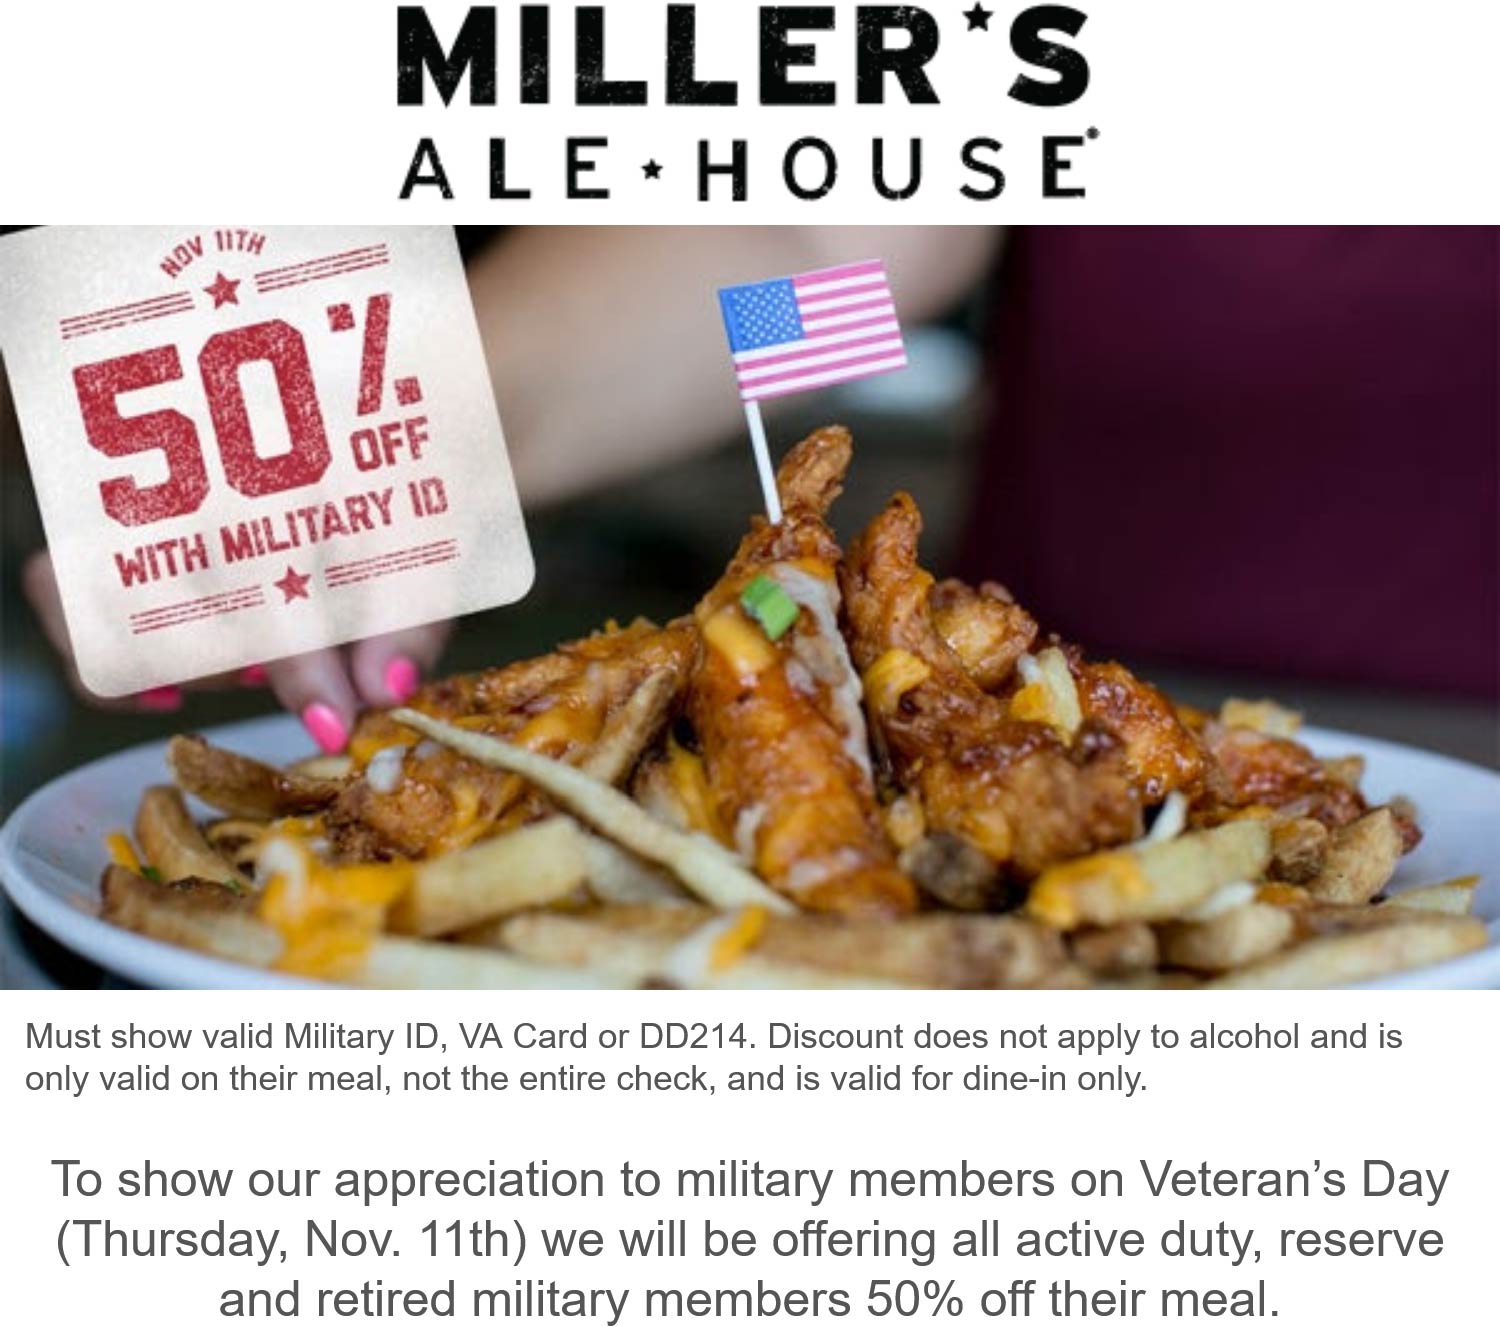 Millers Ale House coupons & promo code for [December 2022]